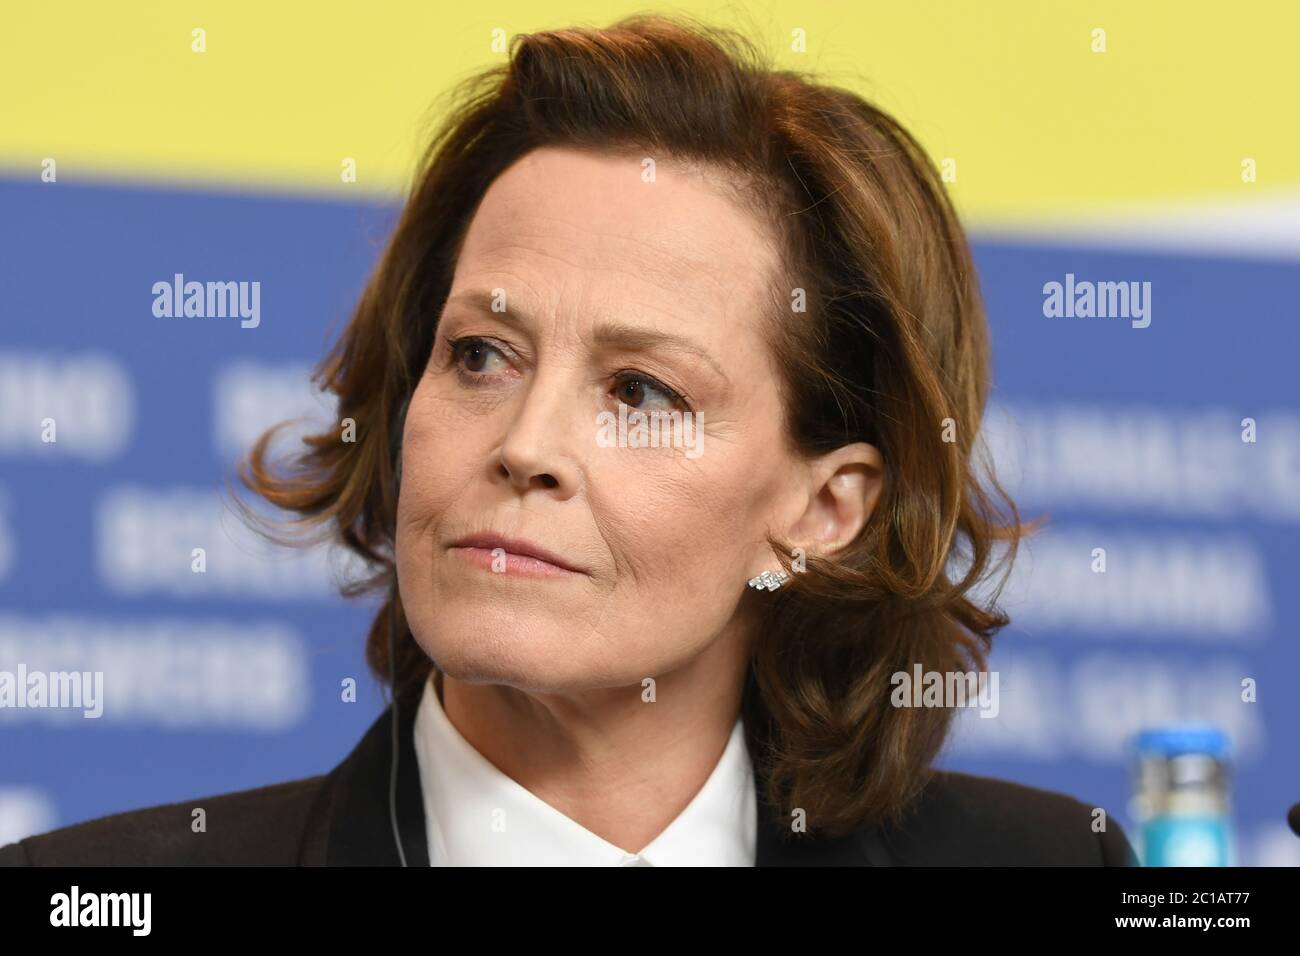 Sigourney Weaver attends the press conference for My Salinger Year during the 70th Berlin Film Festival at the Grand Hyatt Berlin. © Paul Treadway Stock Photo